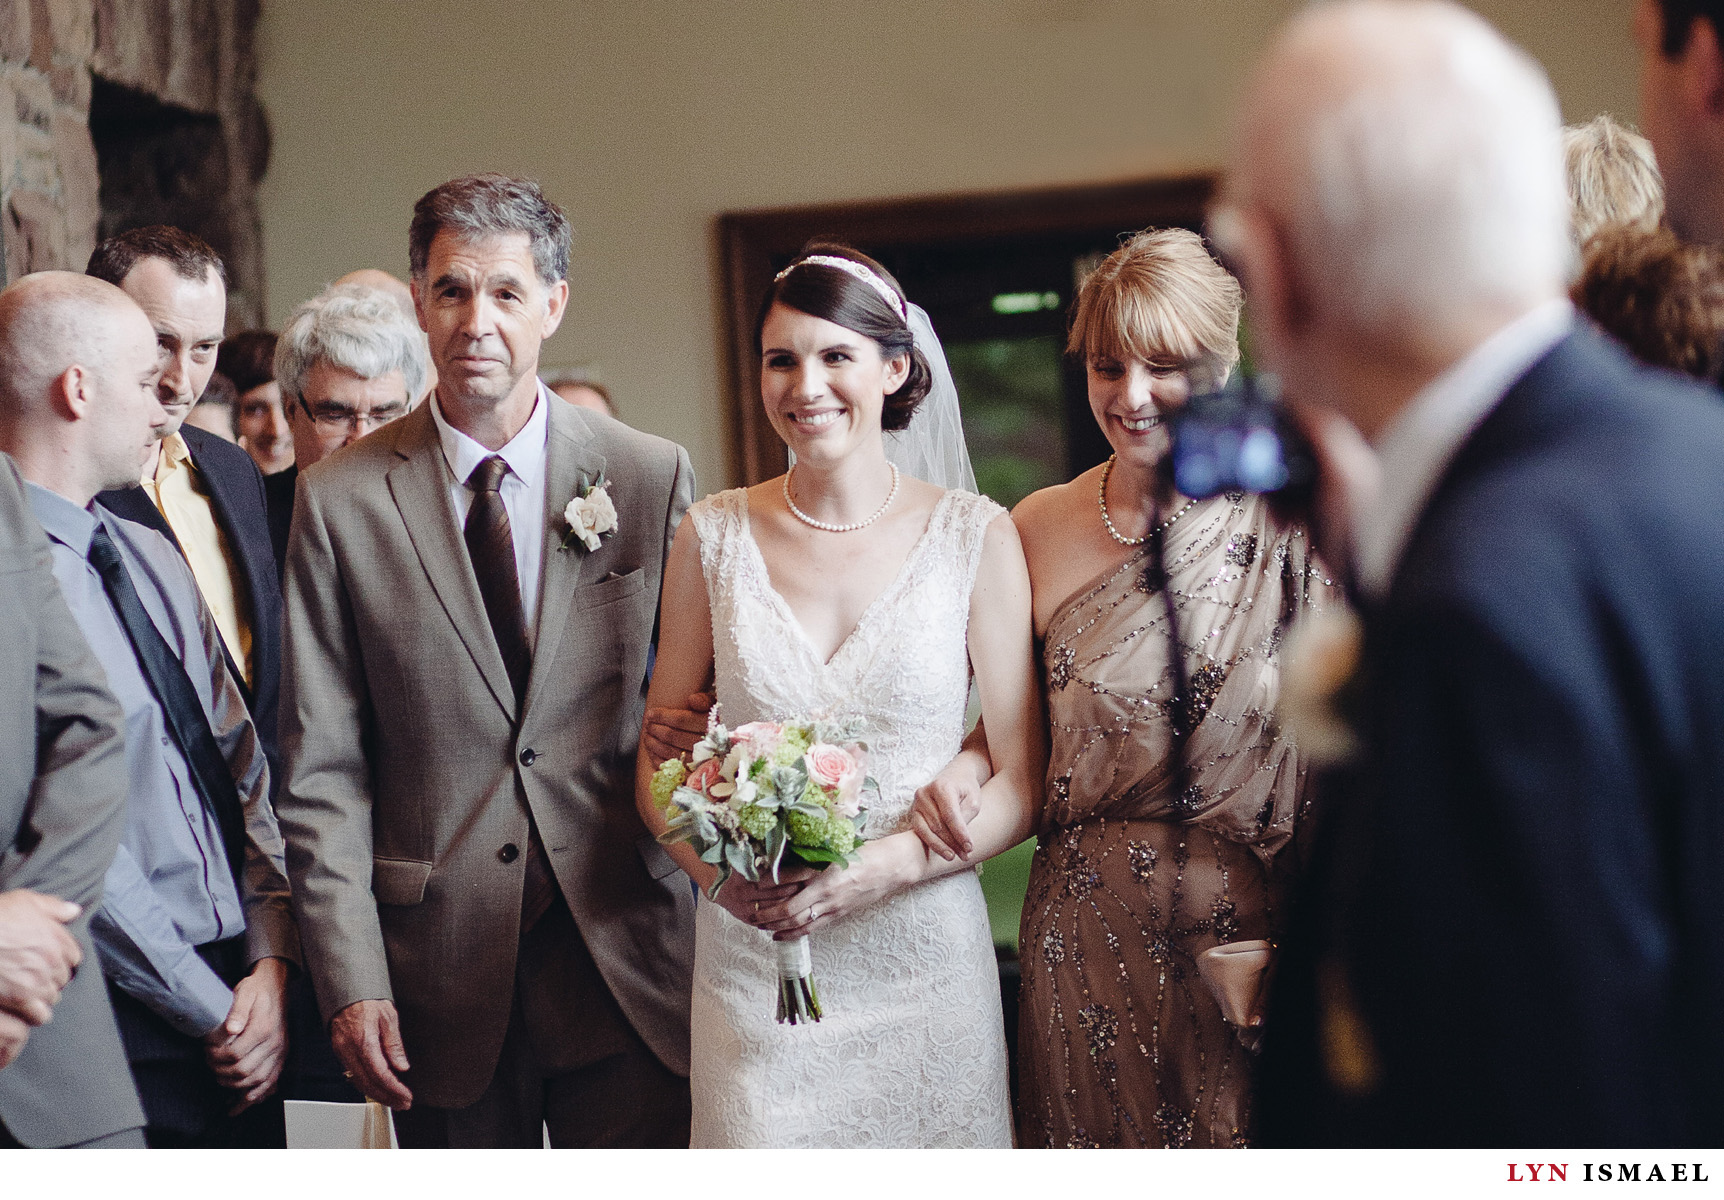 The bride walks down the aisle in Windermere Manor accompanied by her parents.